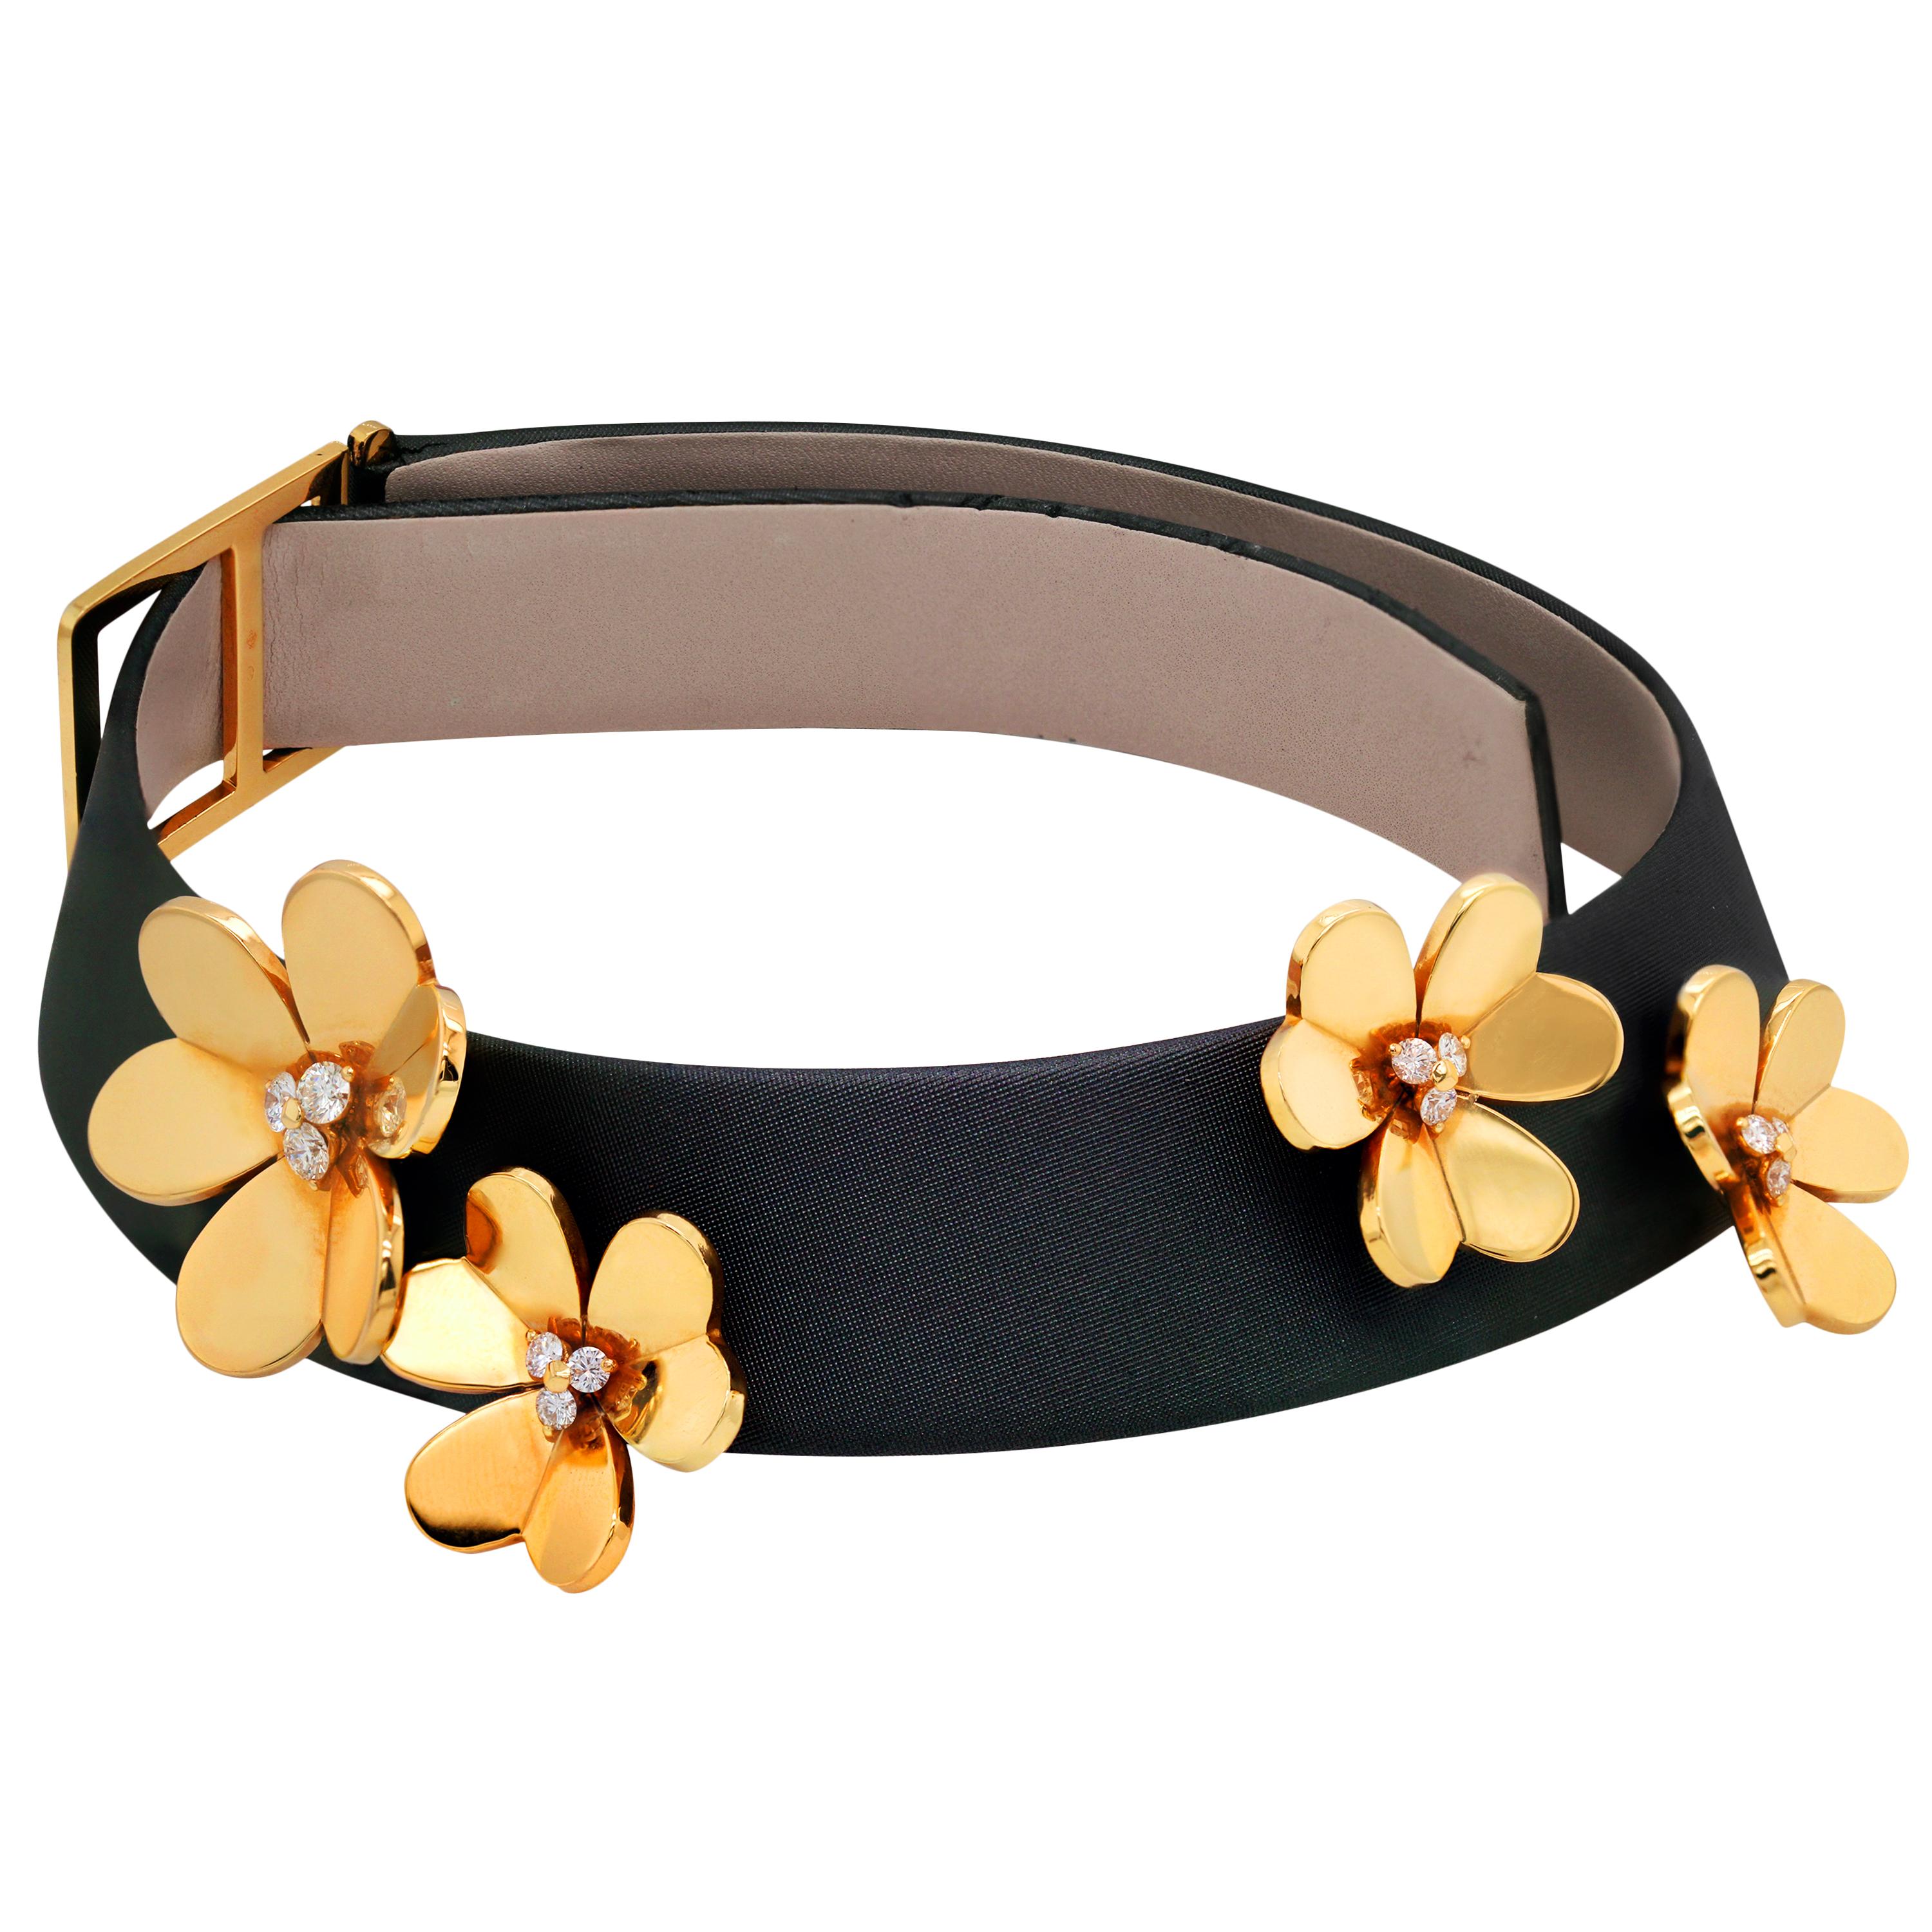 Van Cleef & Arpels Frivole 18 Karat Yellow Gold Diamond Collar Choker Necklace

This rare  choker necklace from the famous Frivole collection by Van Cleef and Arpels features four adjustable Ravena cords with four 18k yellow gold flowers accented